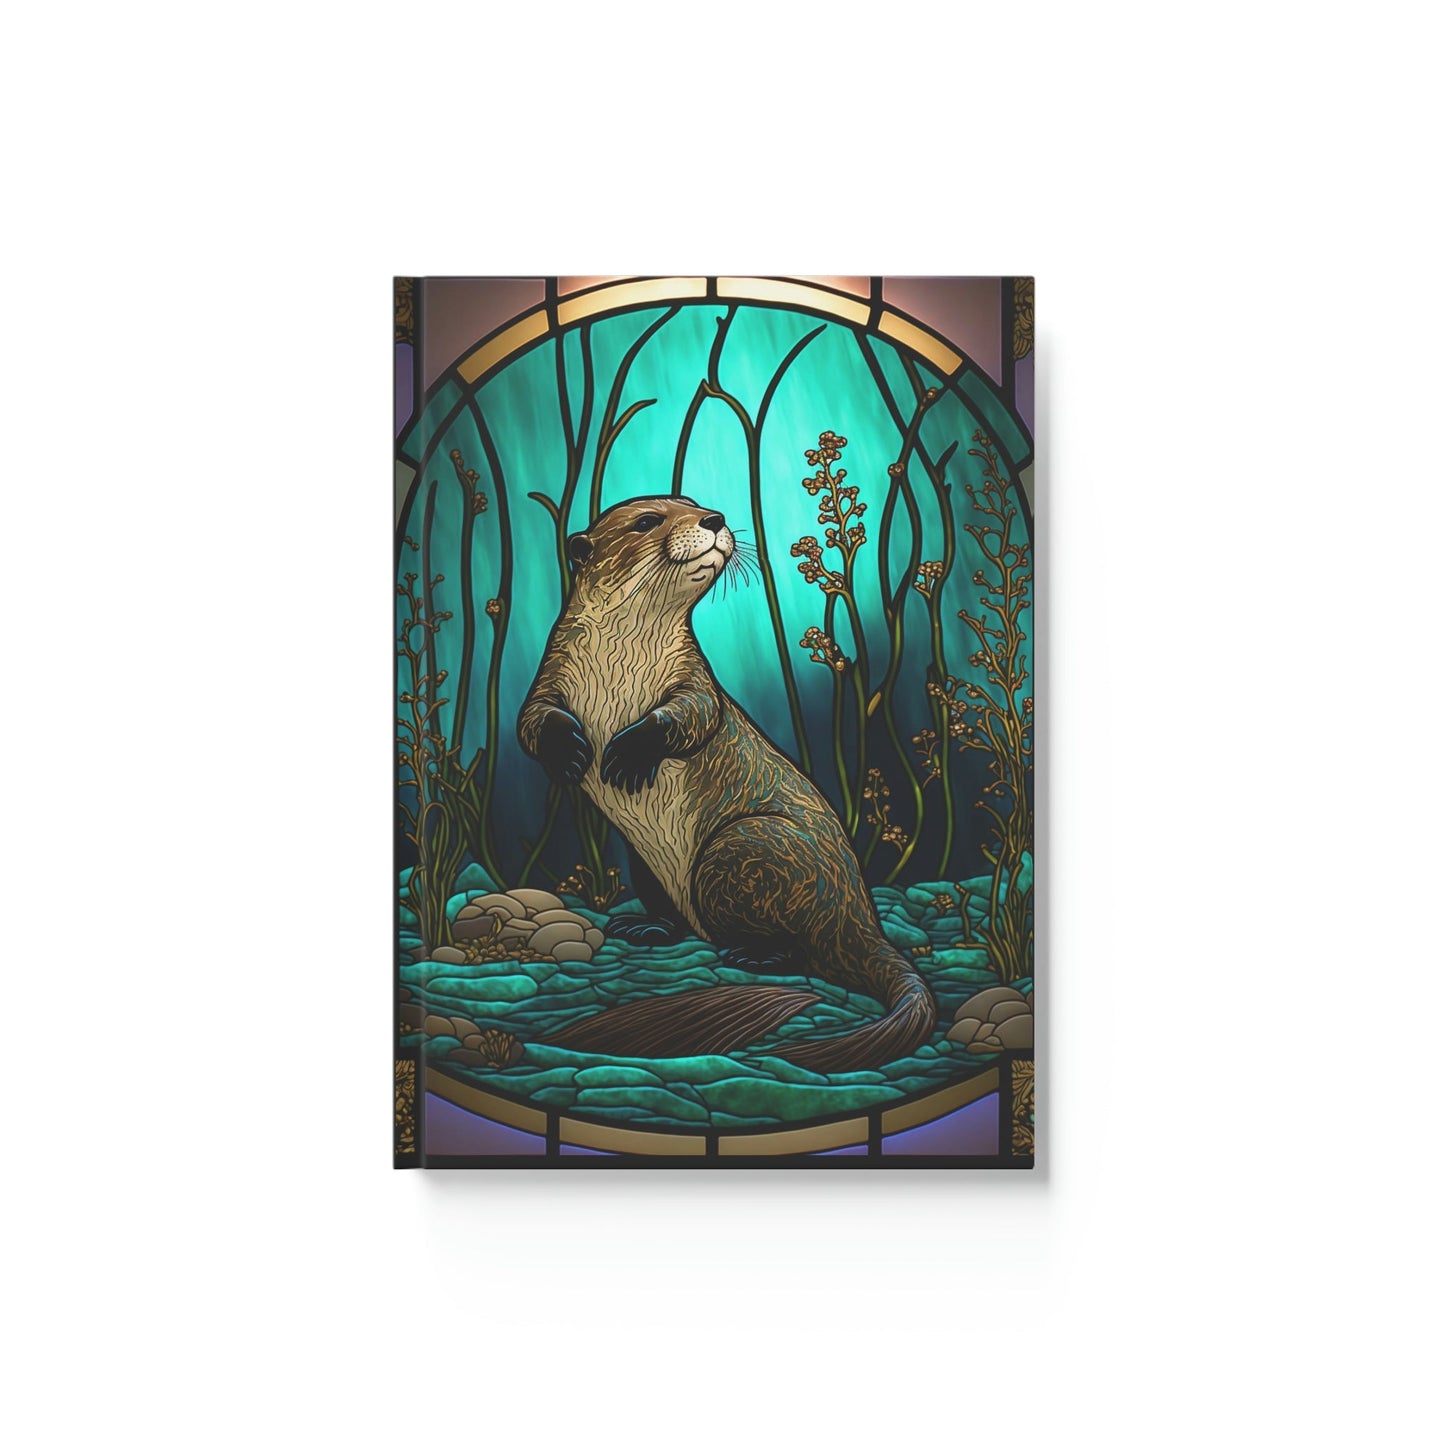 Stained Glass Otter Hard Backed Journal